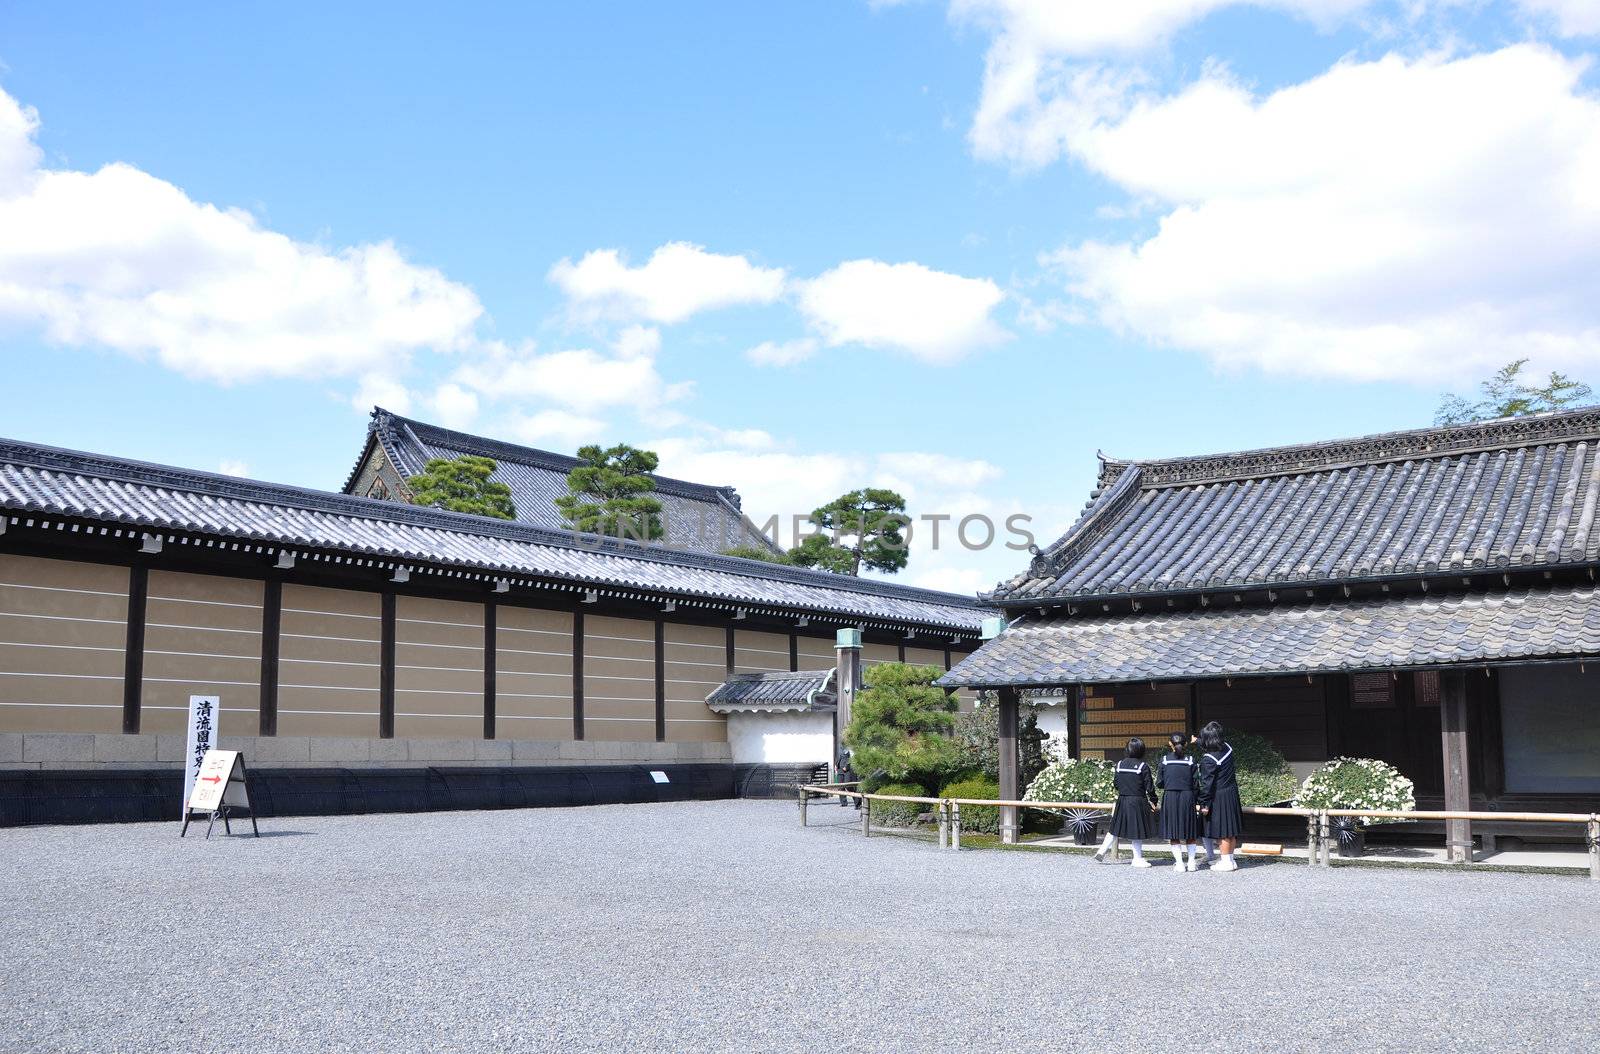 Ancient japanese architecture in nijo castle, Kyoto, Japan 